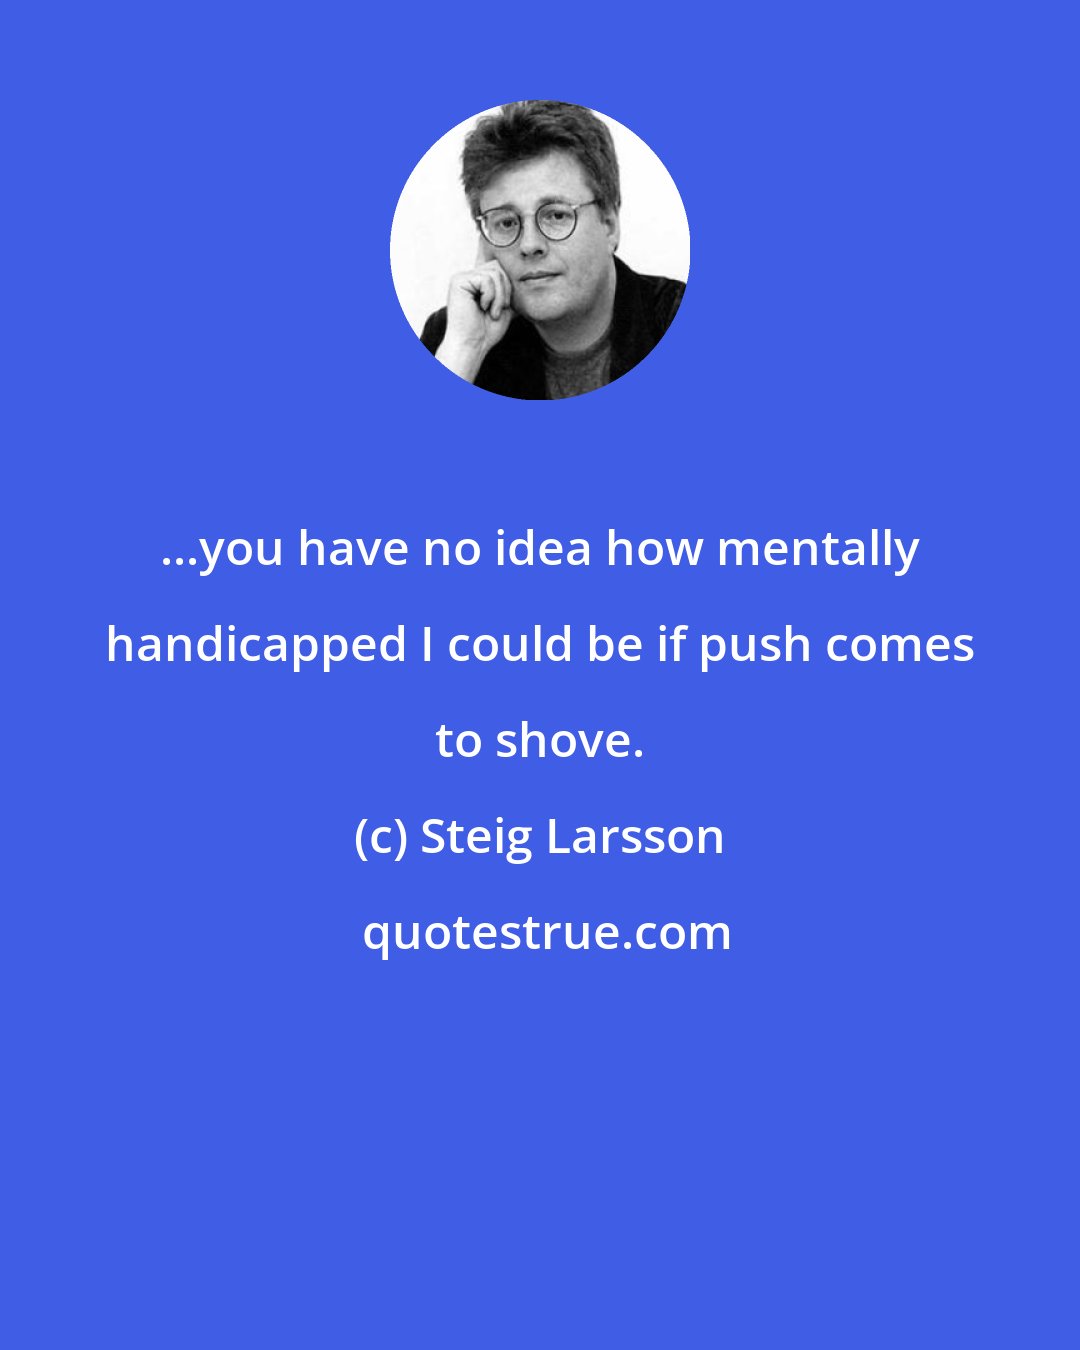 Steig Larsson: ...you have no idea how mentally handicapped I could be if push comes to shove.